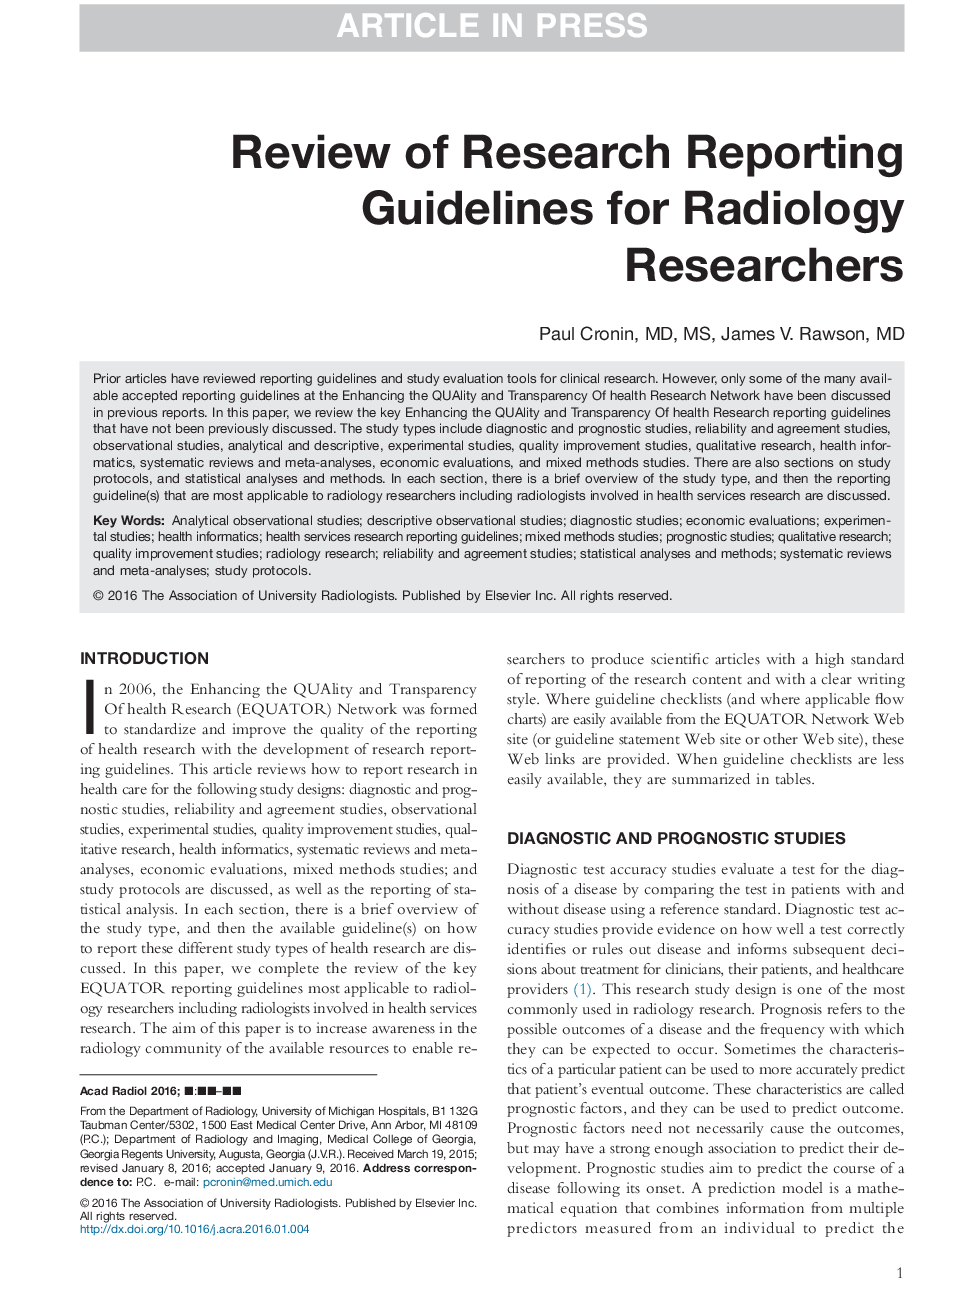 Review of Research Reporting Guidelines for Radiology Researchers